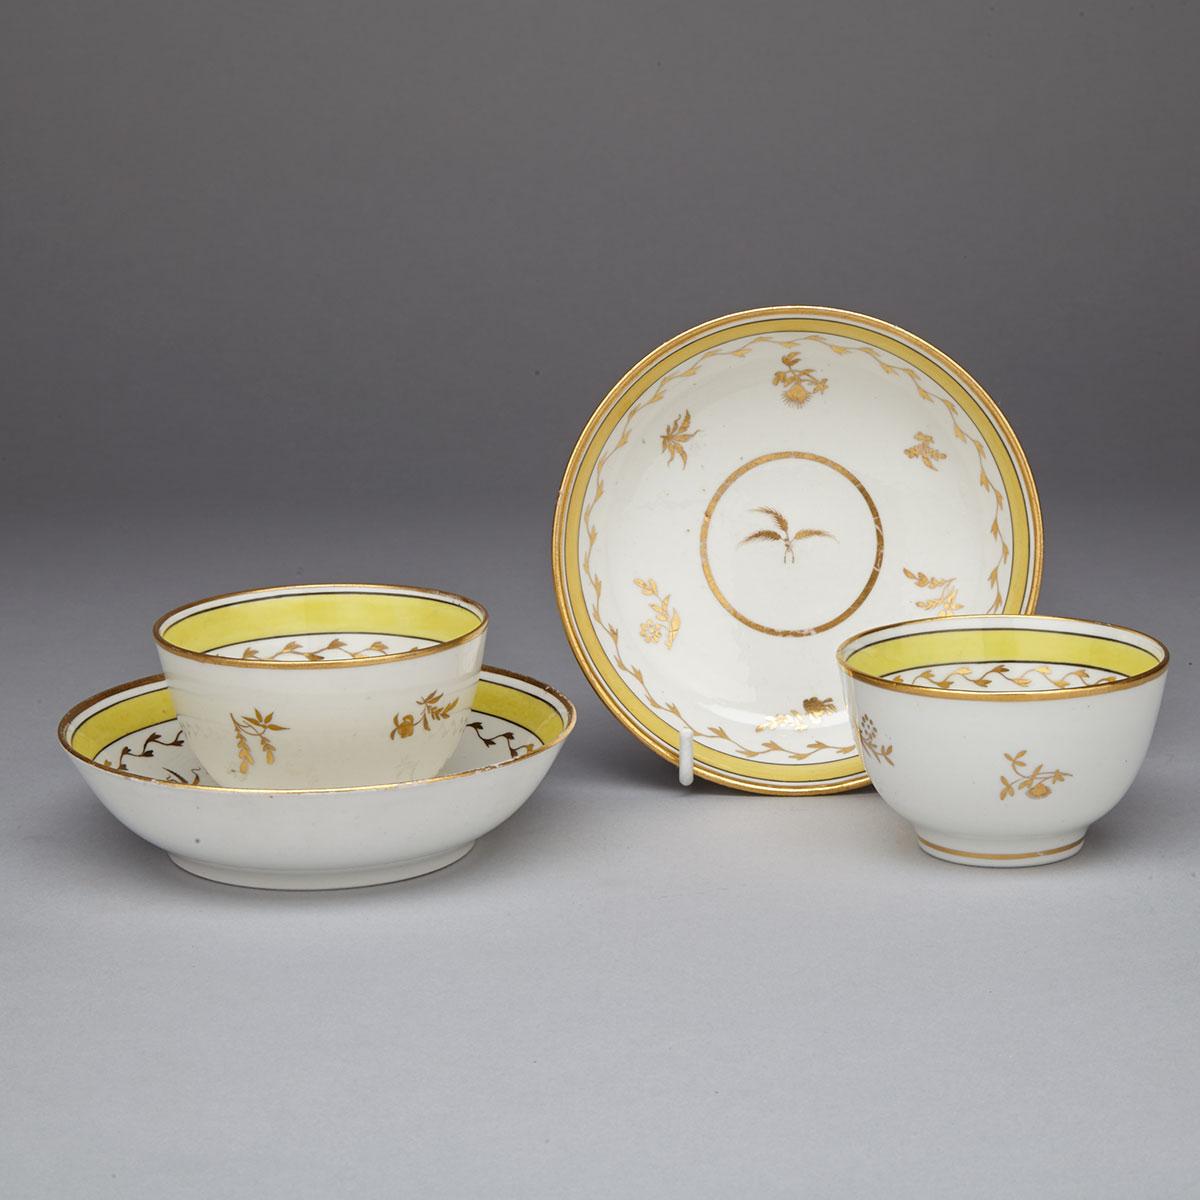 Pair of Thomas Wolfe (Factory Z) Tea Bowls and Saucers, c.1790-1800